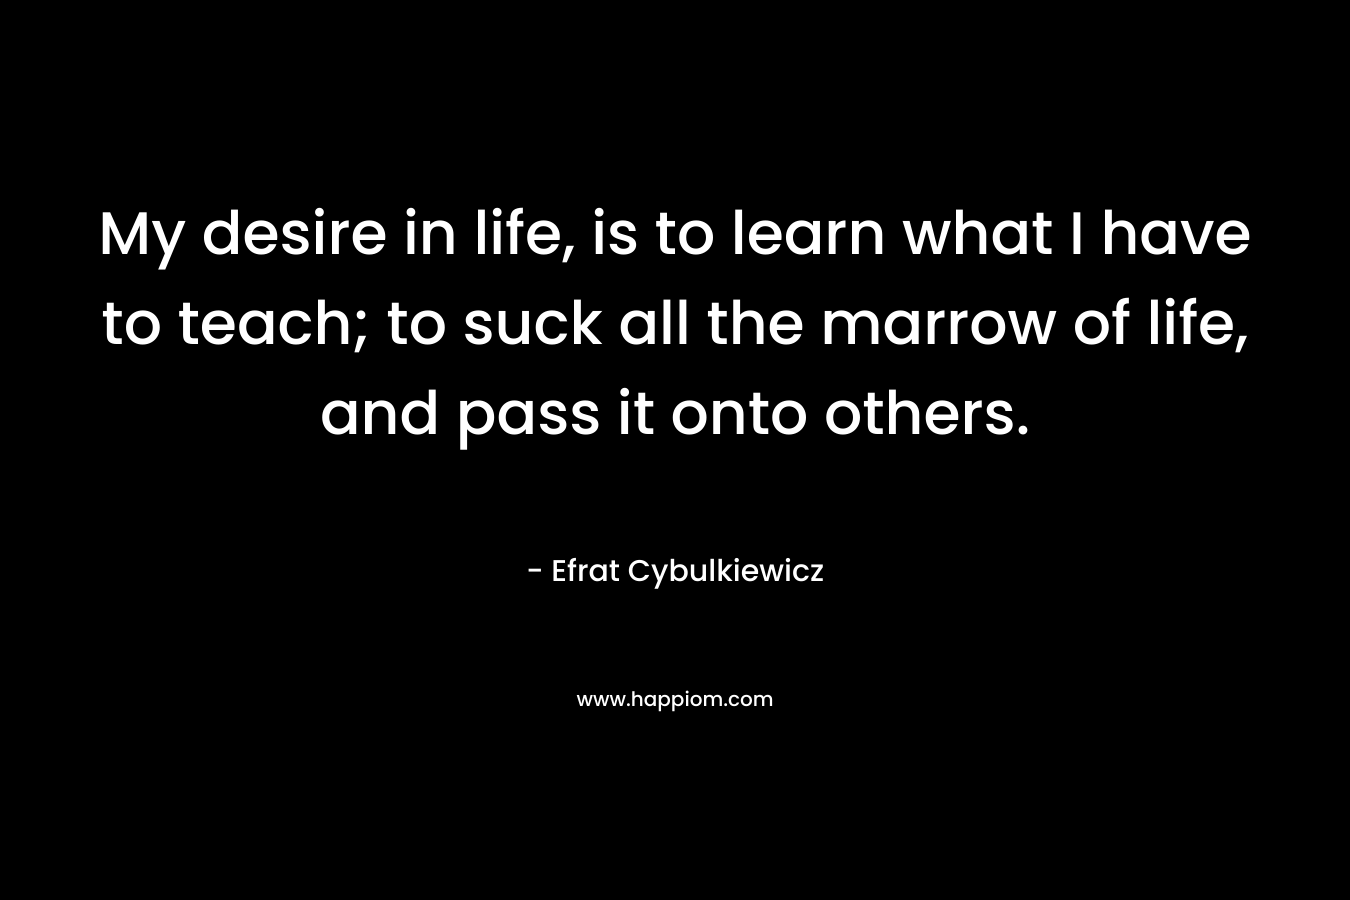 My desire in life, is to learn what I have to teach; to suck all the marrow of life, and pass it onto others.